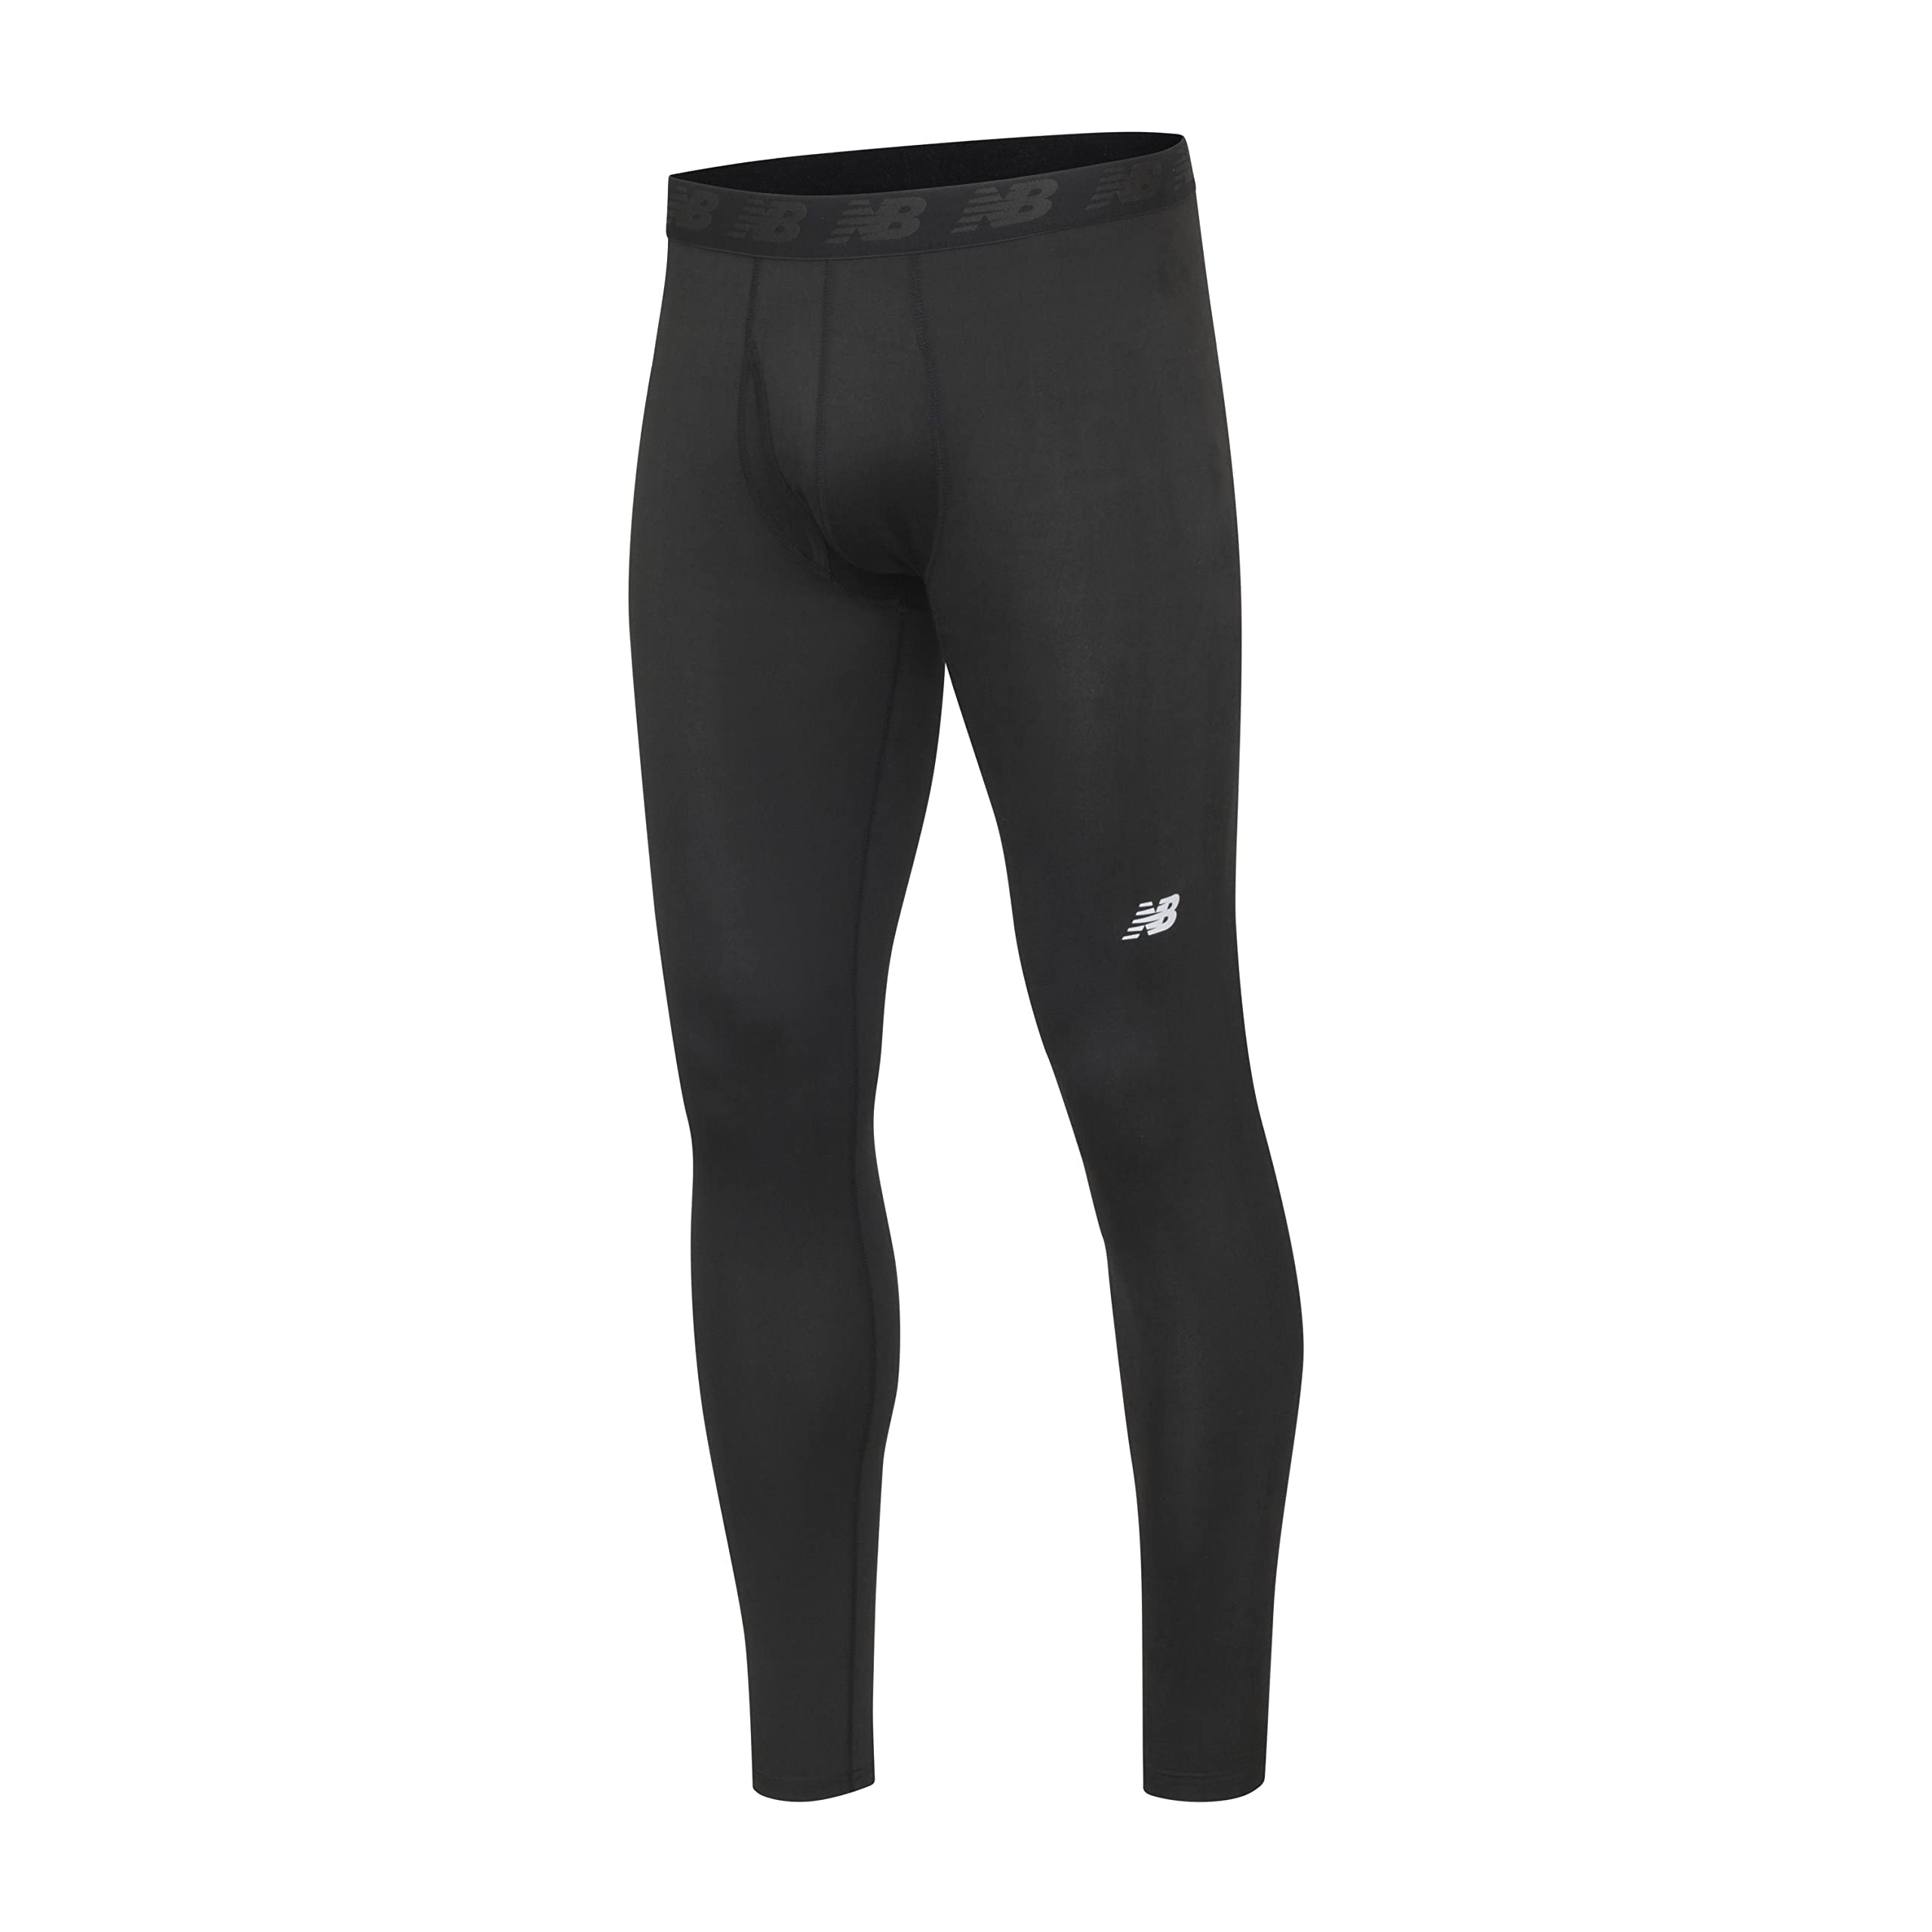 New Balance Men's Compression Thermal Non-Rolling Baselayer Pants